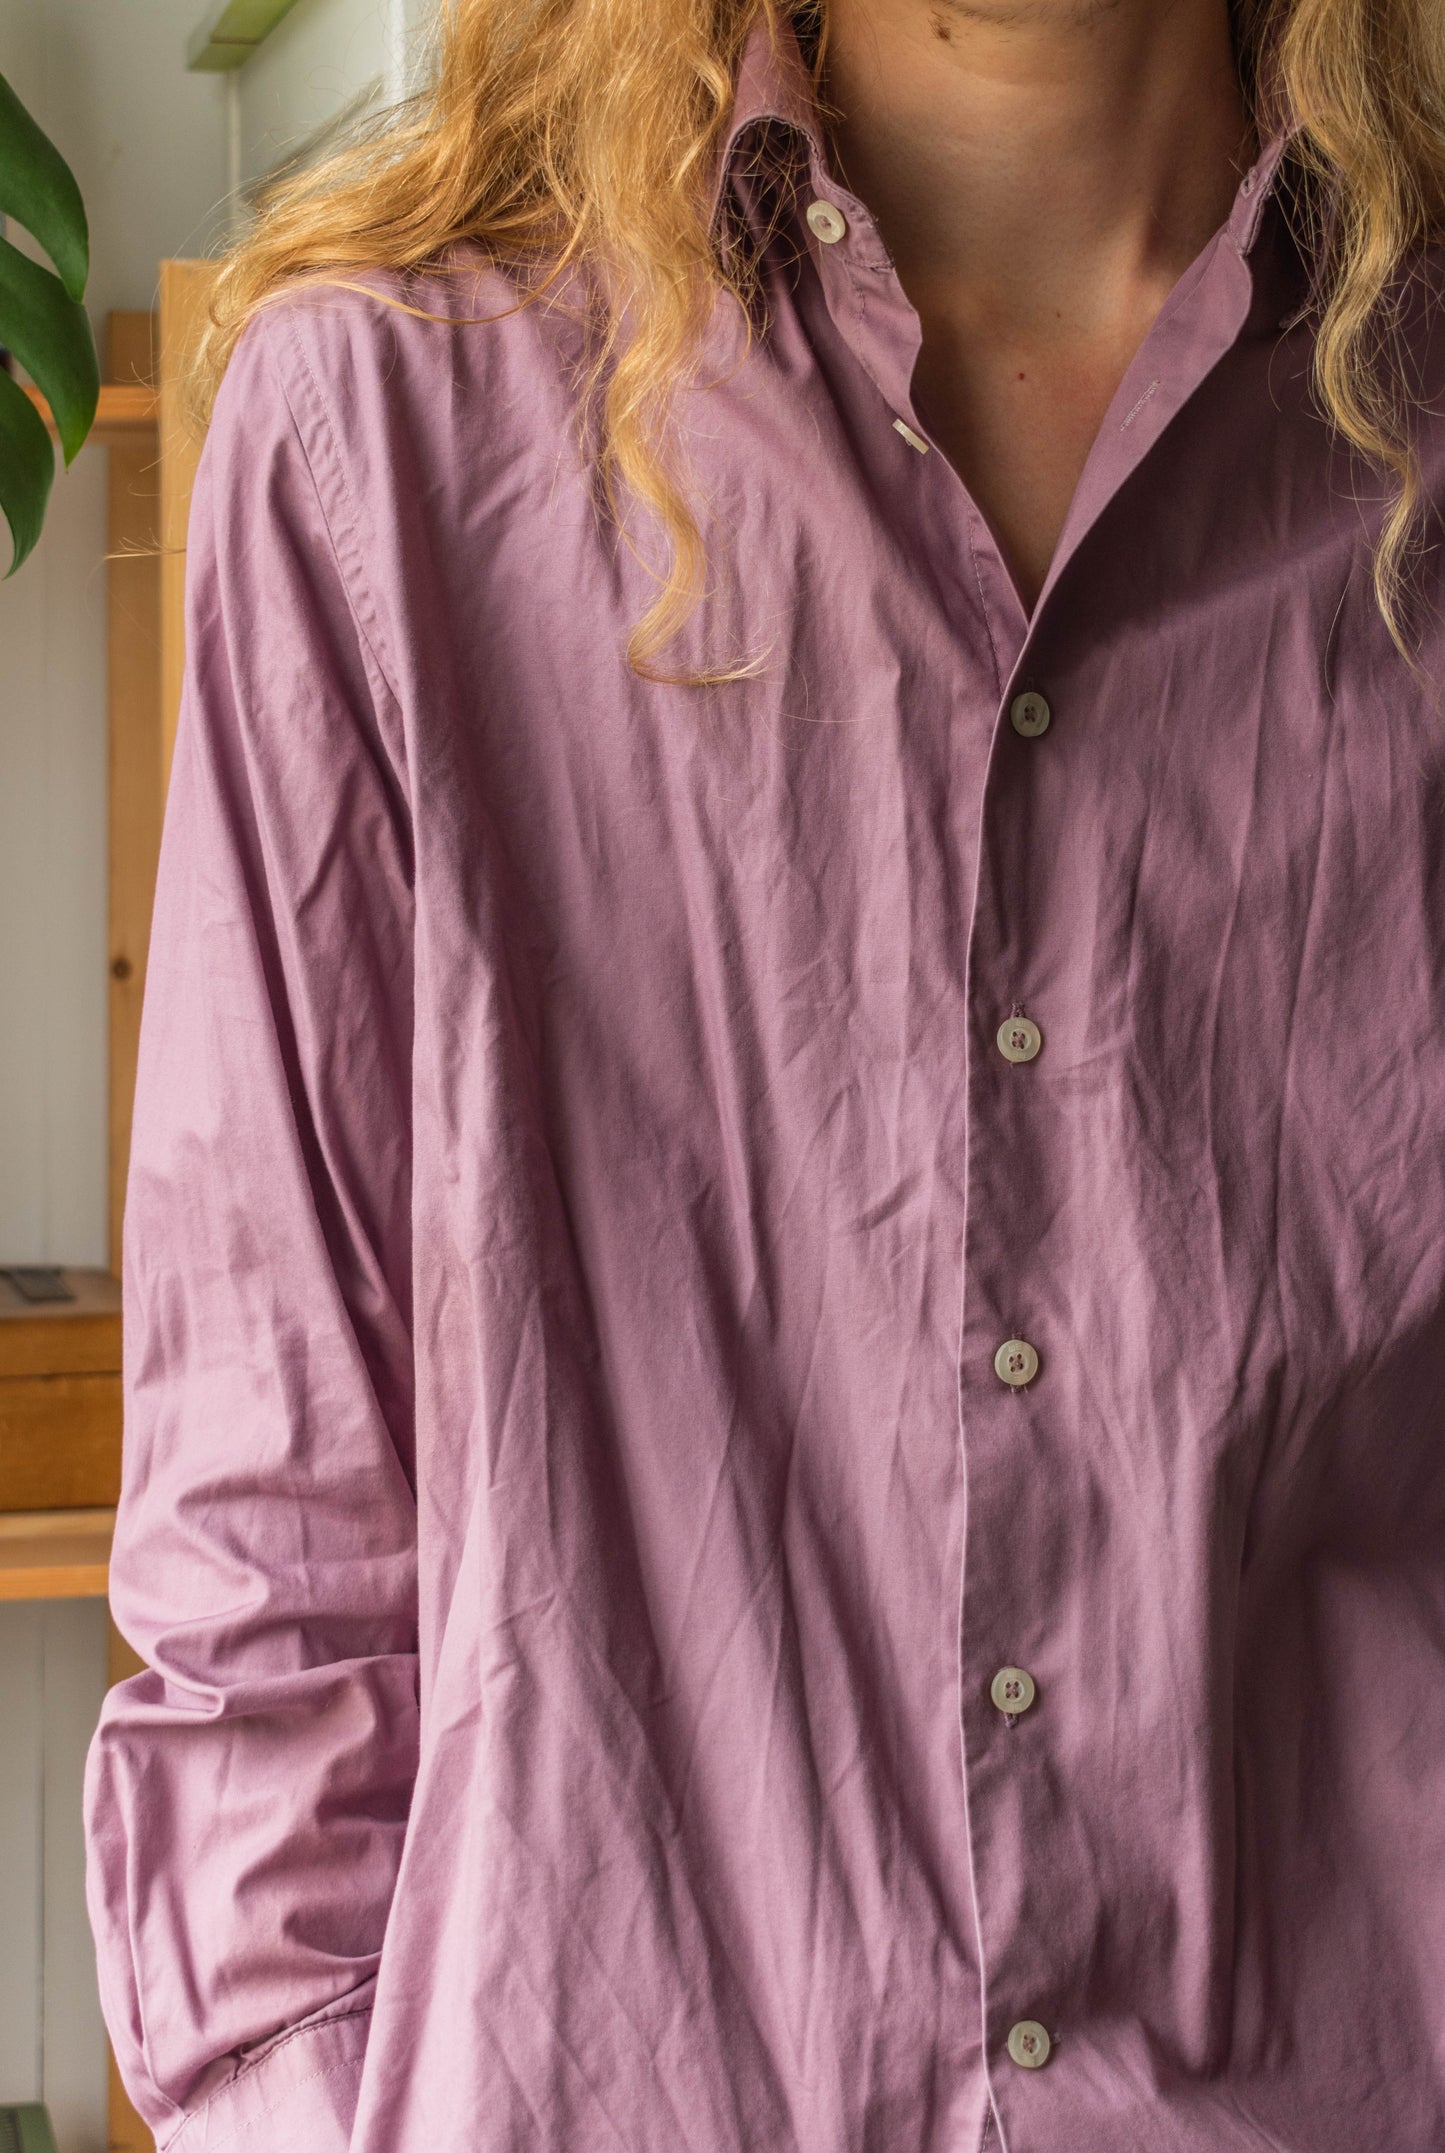 NEW IN! Lilac blouse